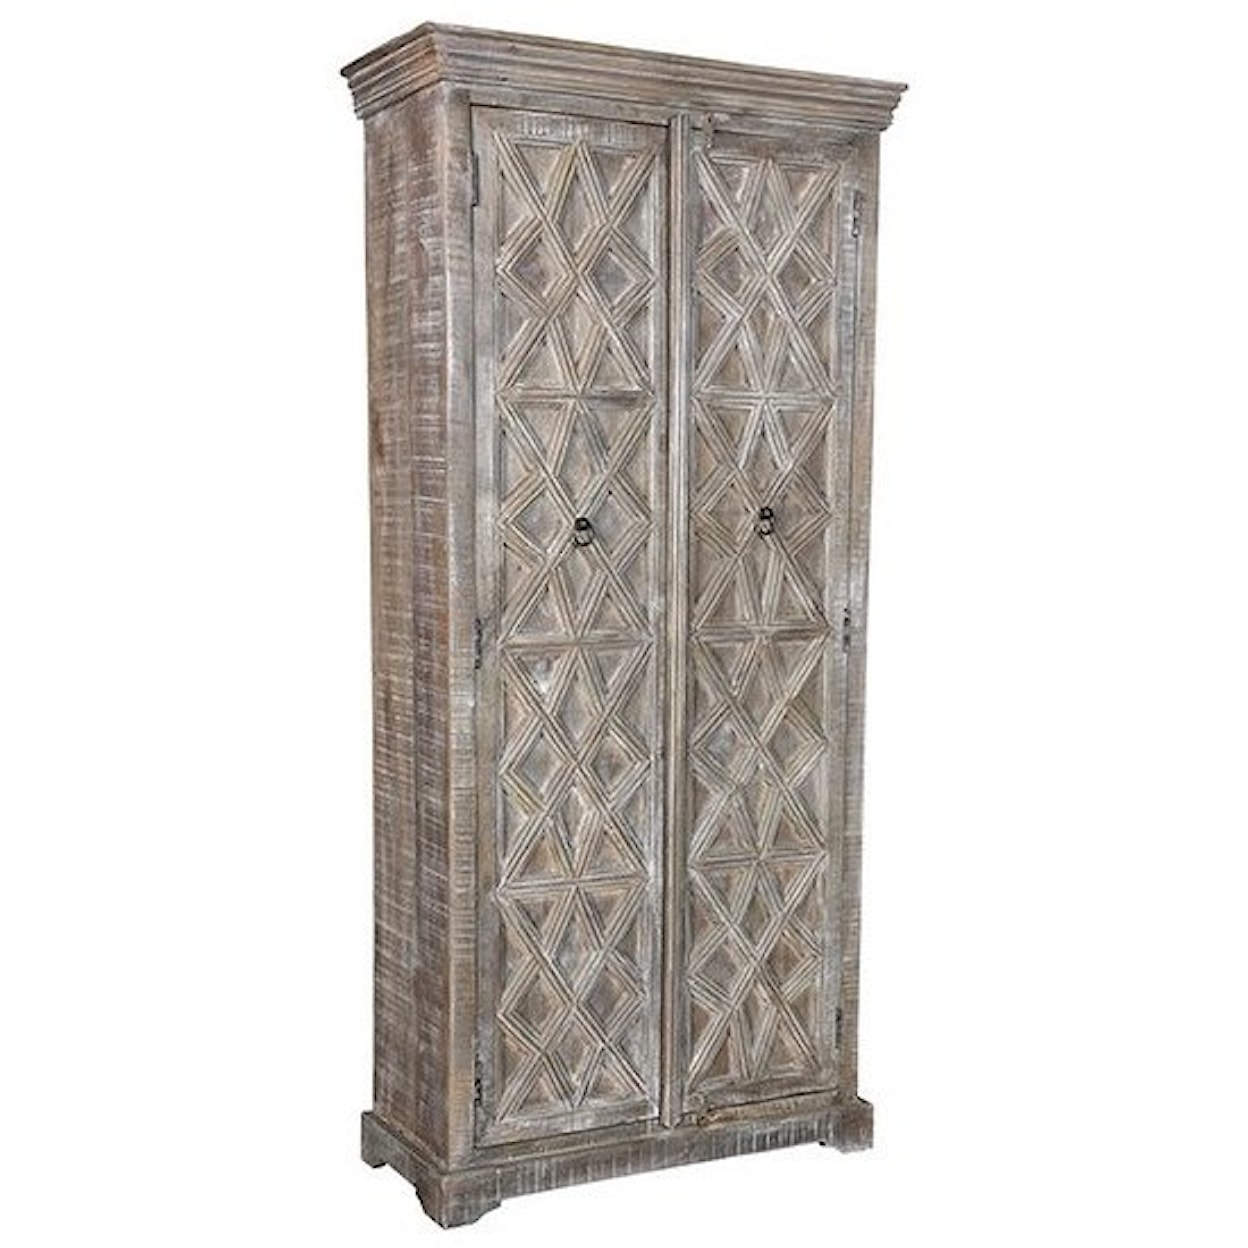 Crestview Collection Accent Furniture Mango Wood Cabinet